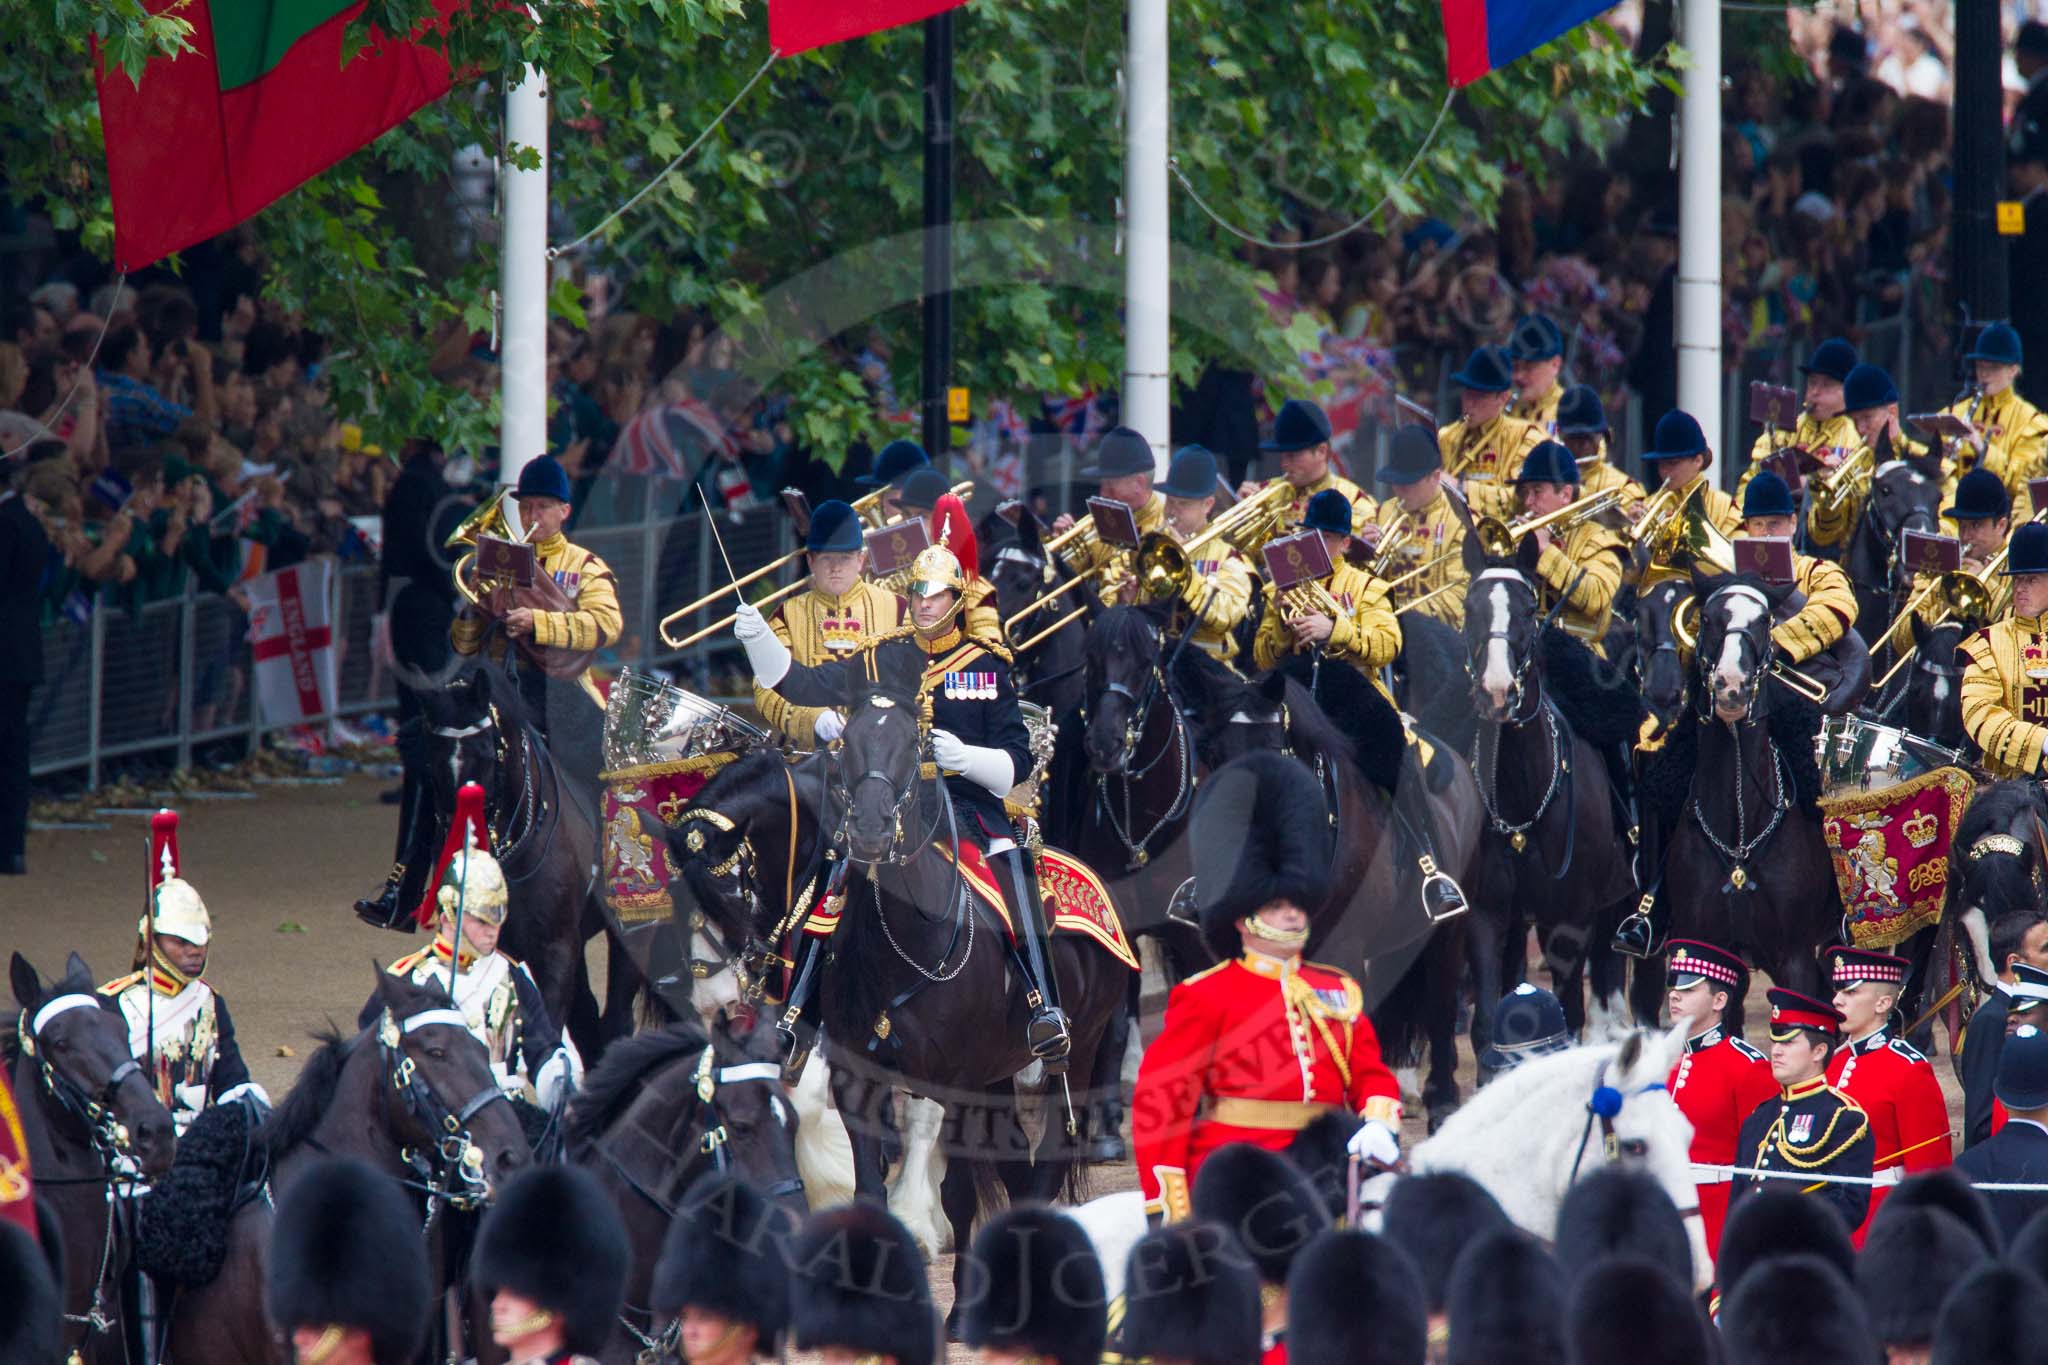 Trooping the Colour 2014.
Horse Guards Parade, Westminster,
London SW1A,

United Kingdom,
on 14 June 2014 at 10:56, image #311